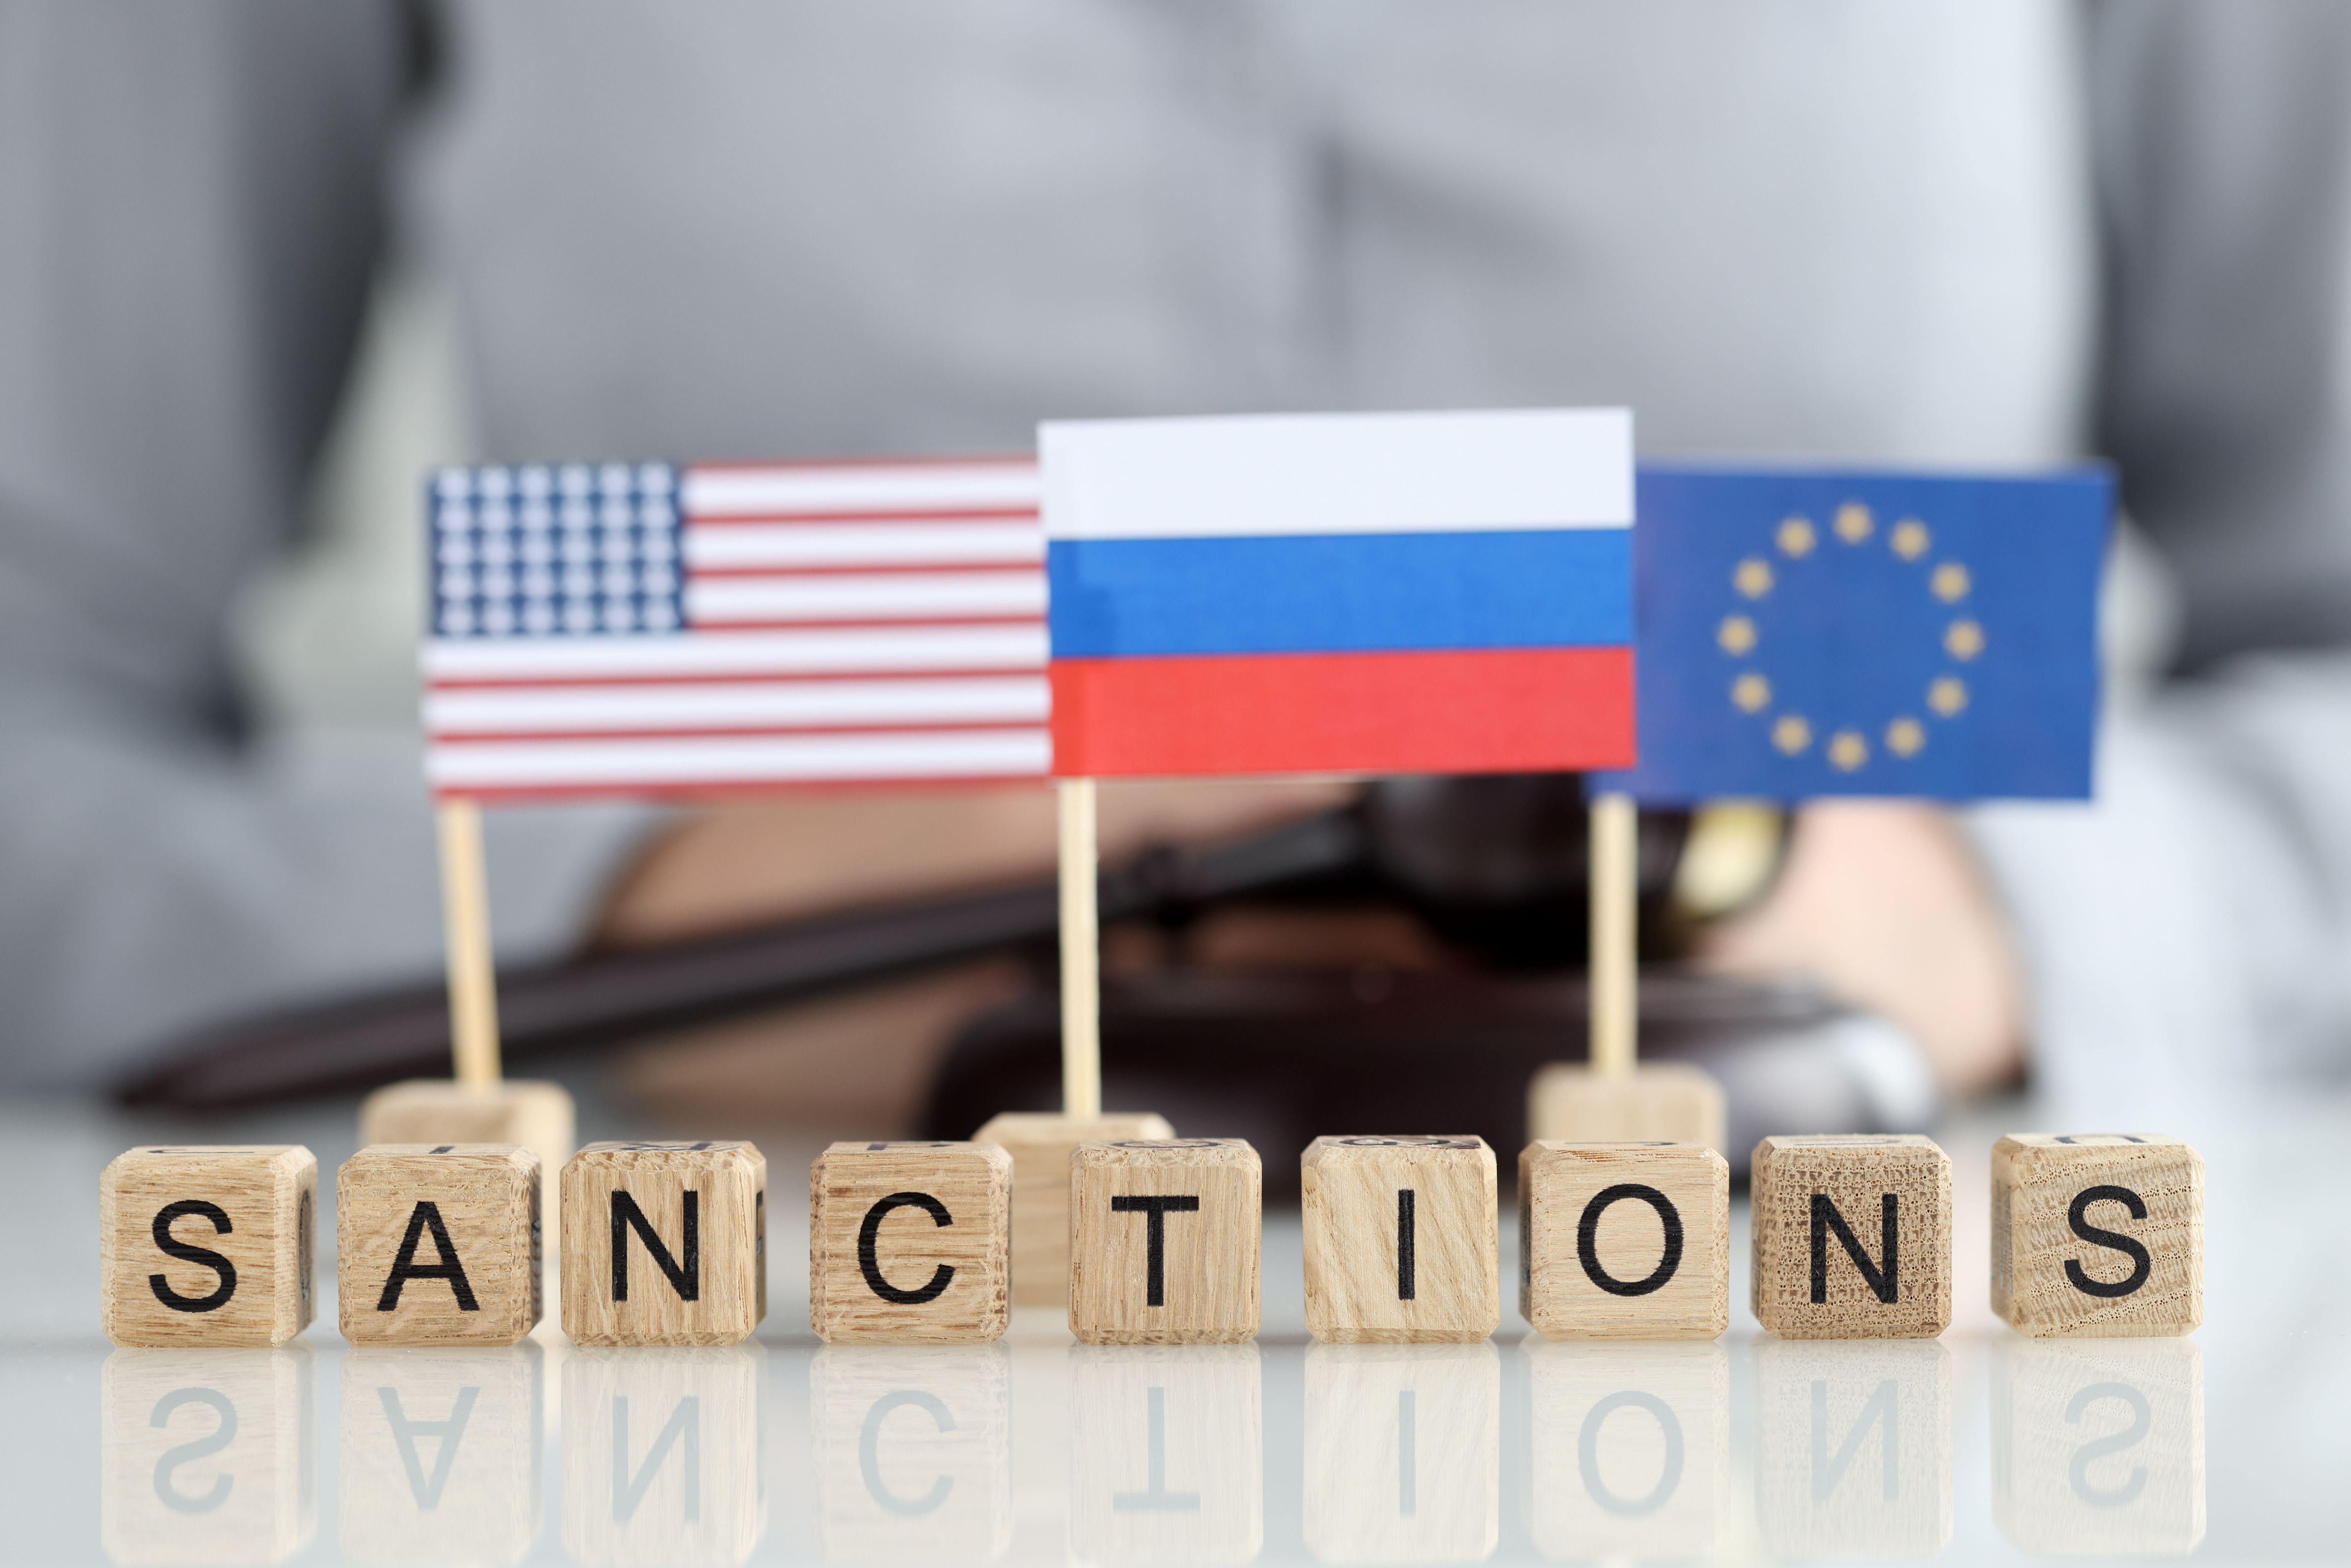 Sanctions spelt out in blocks with Russian, EU and US flags behind